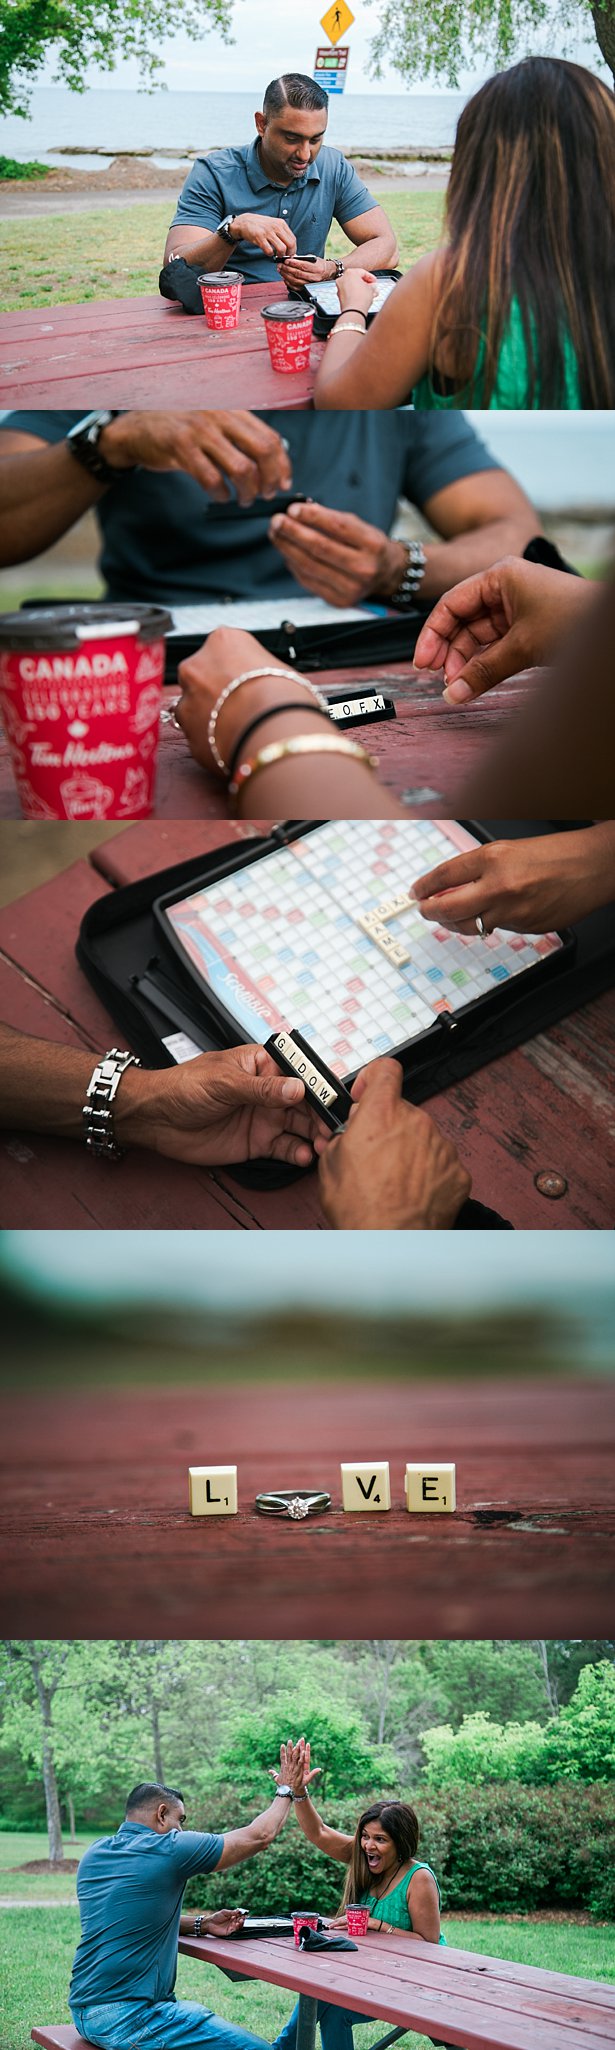 Jennifer Blaak Photography, Toronto Wedding Photographer, Engagement Session at Jack Darling Memorial Park in Mississauga, Couple playing scrabble, Tim Hortons cups